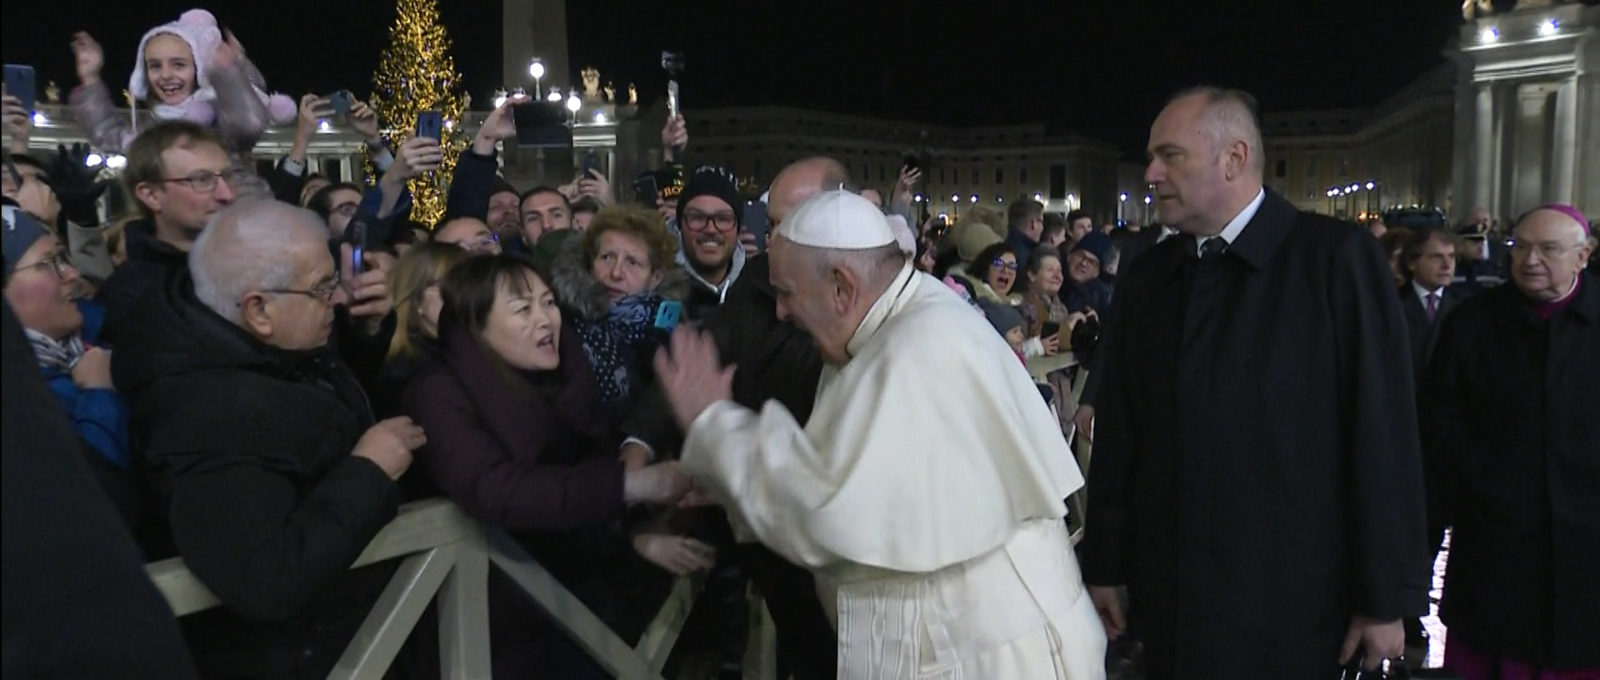 POPE INCIDENT NEW YEAR’S EVE